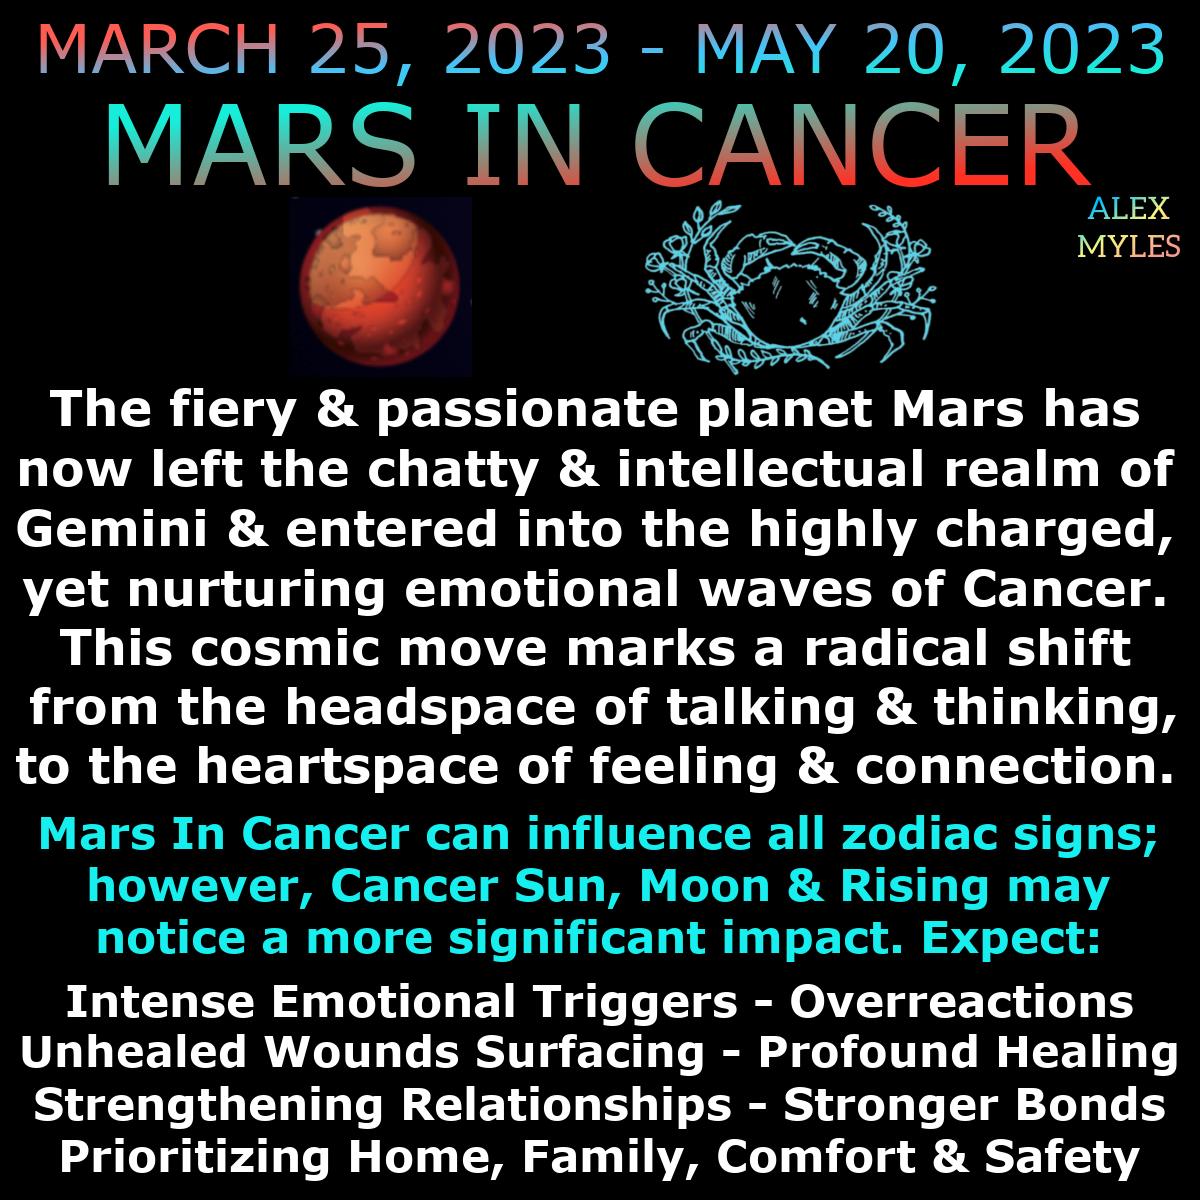 Mars in Cancer